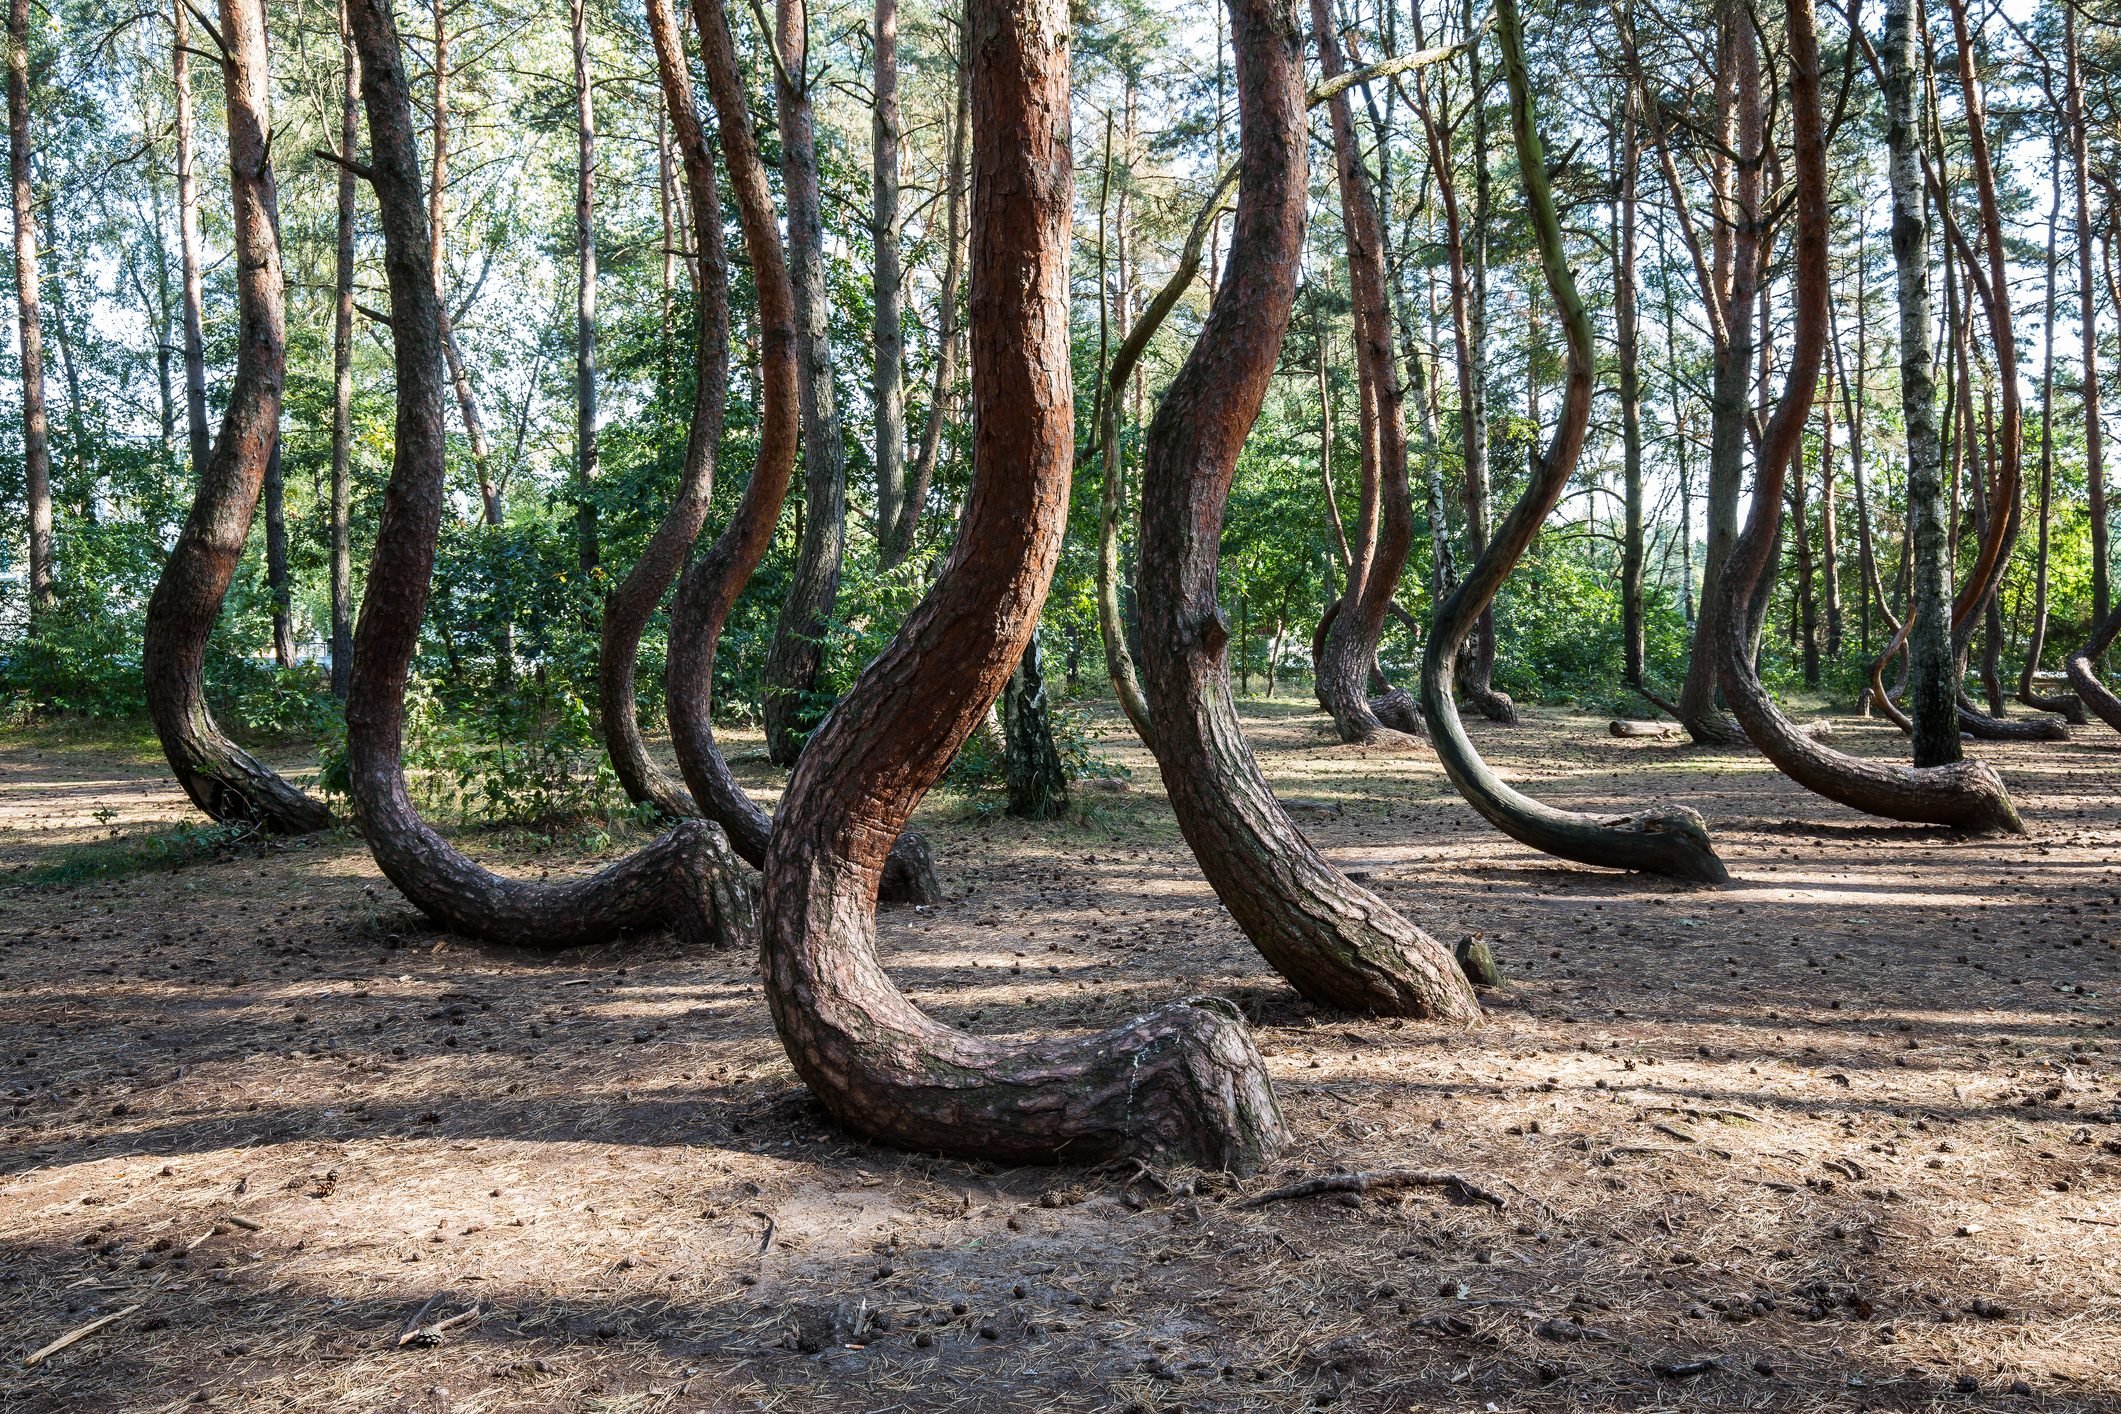 The Crooked Forest (Polish: Krzywy Las) with oddly-shaped pine trees (Poland/ West Pommerania)